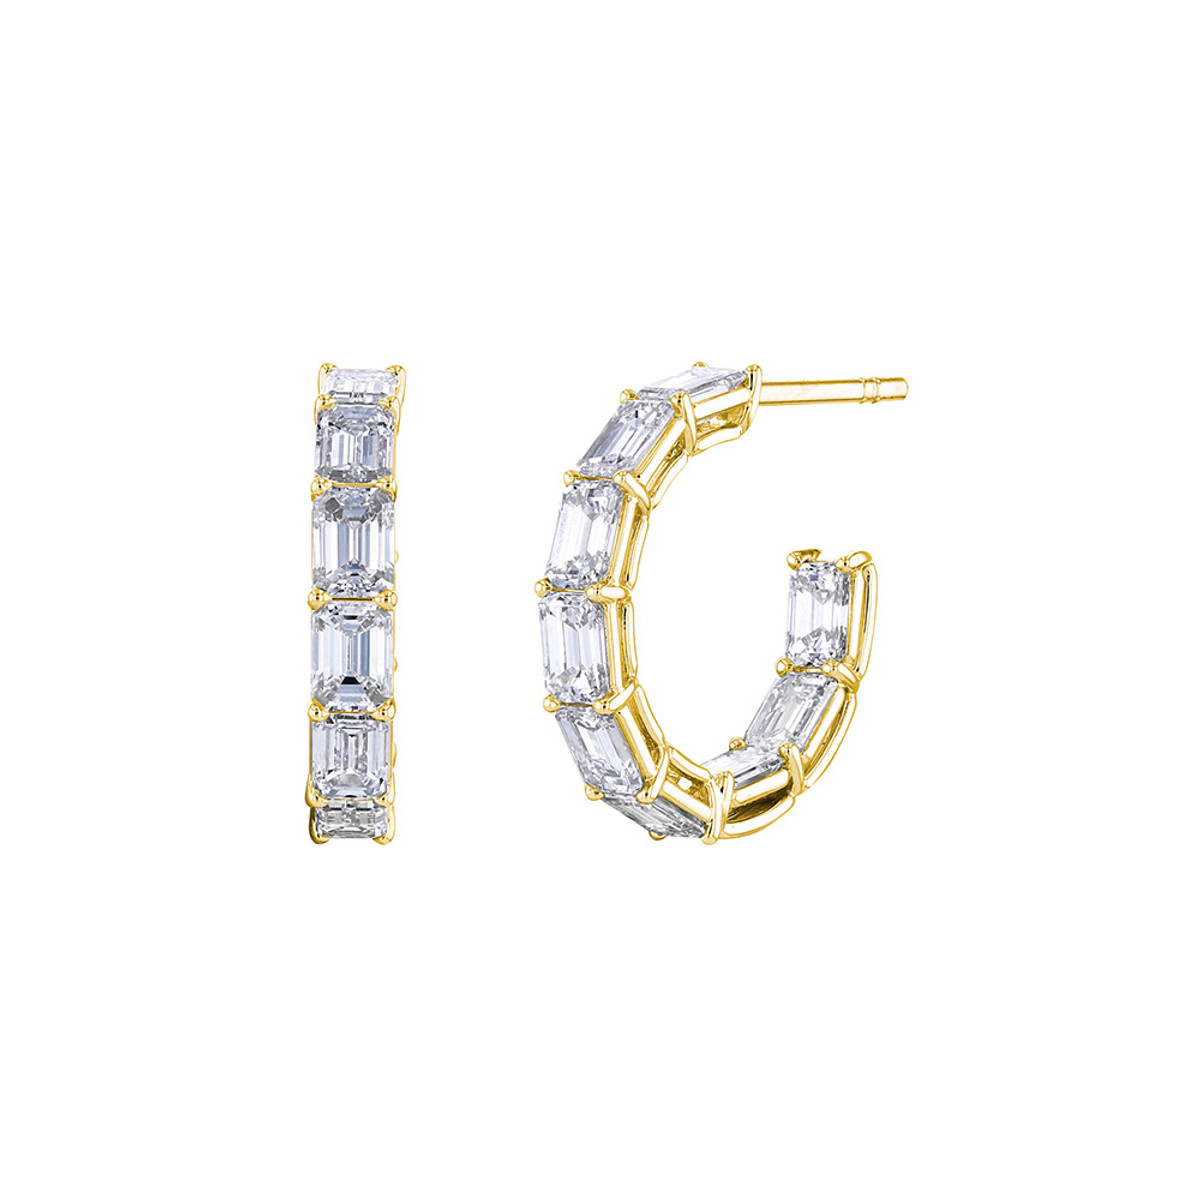 Hyde Park Collection 18K Yellow Gold Diamond Hoop Earrings-59195